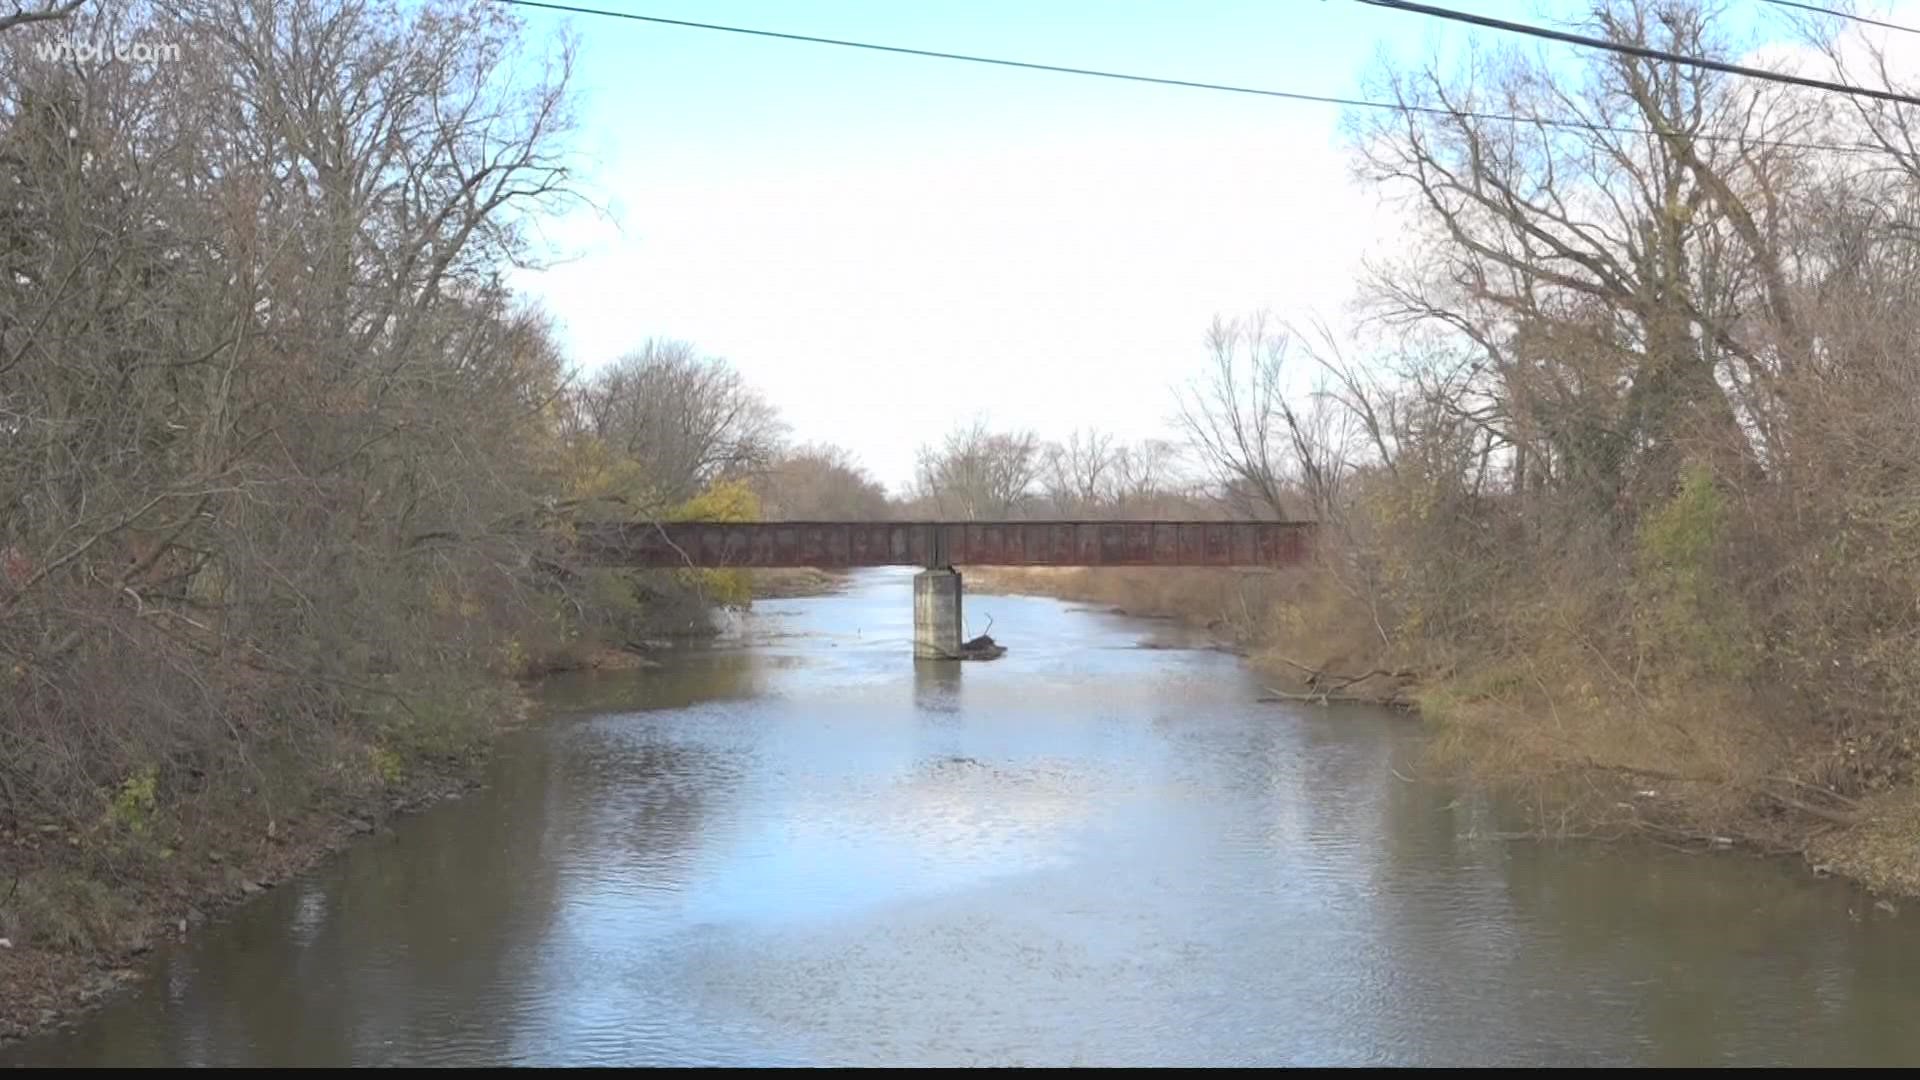 The Norfolk Southern rail bridge has been identified to be replaced for flood mitigation efforts for years